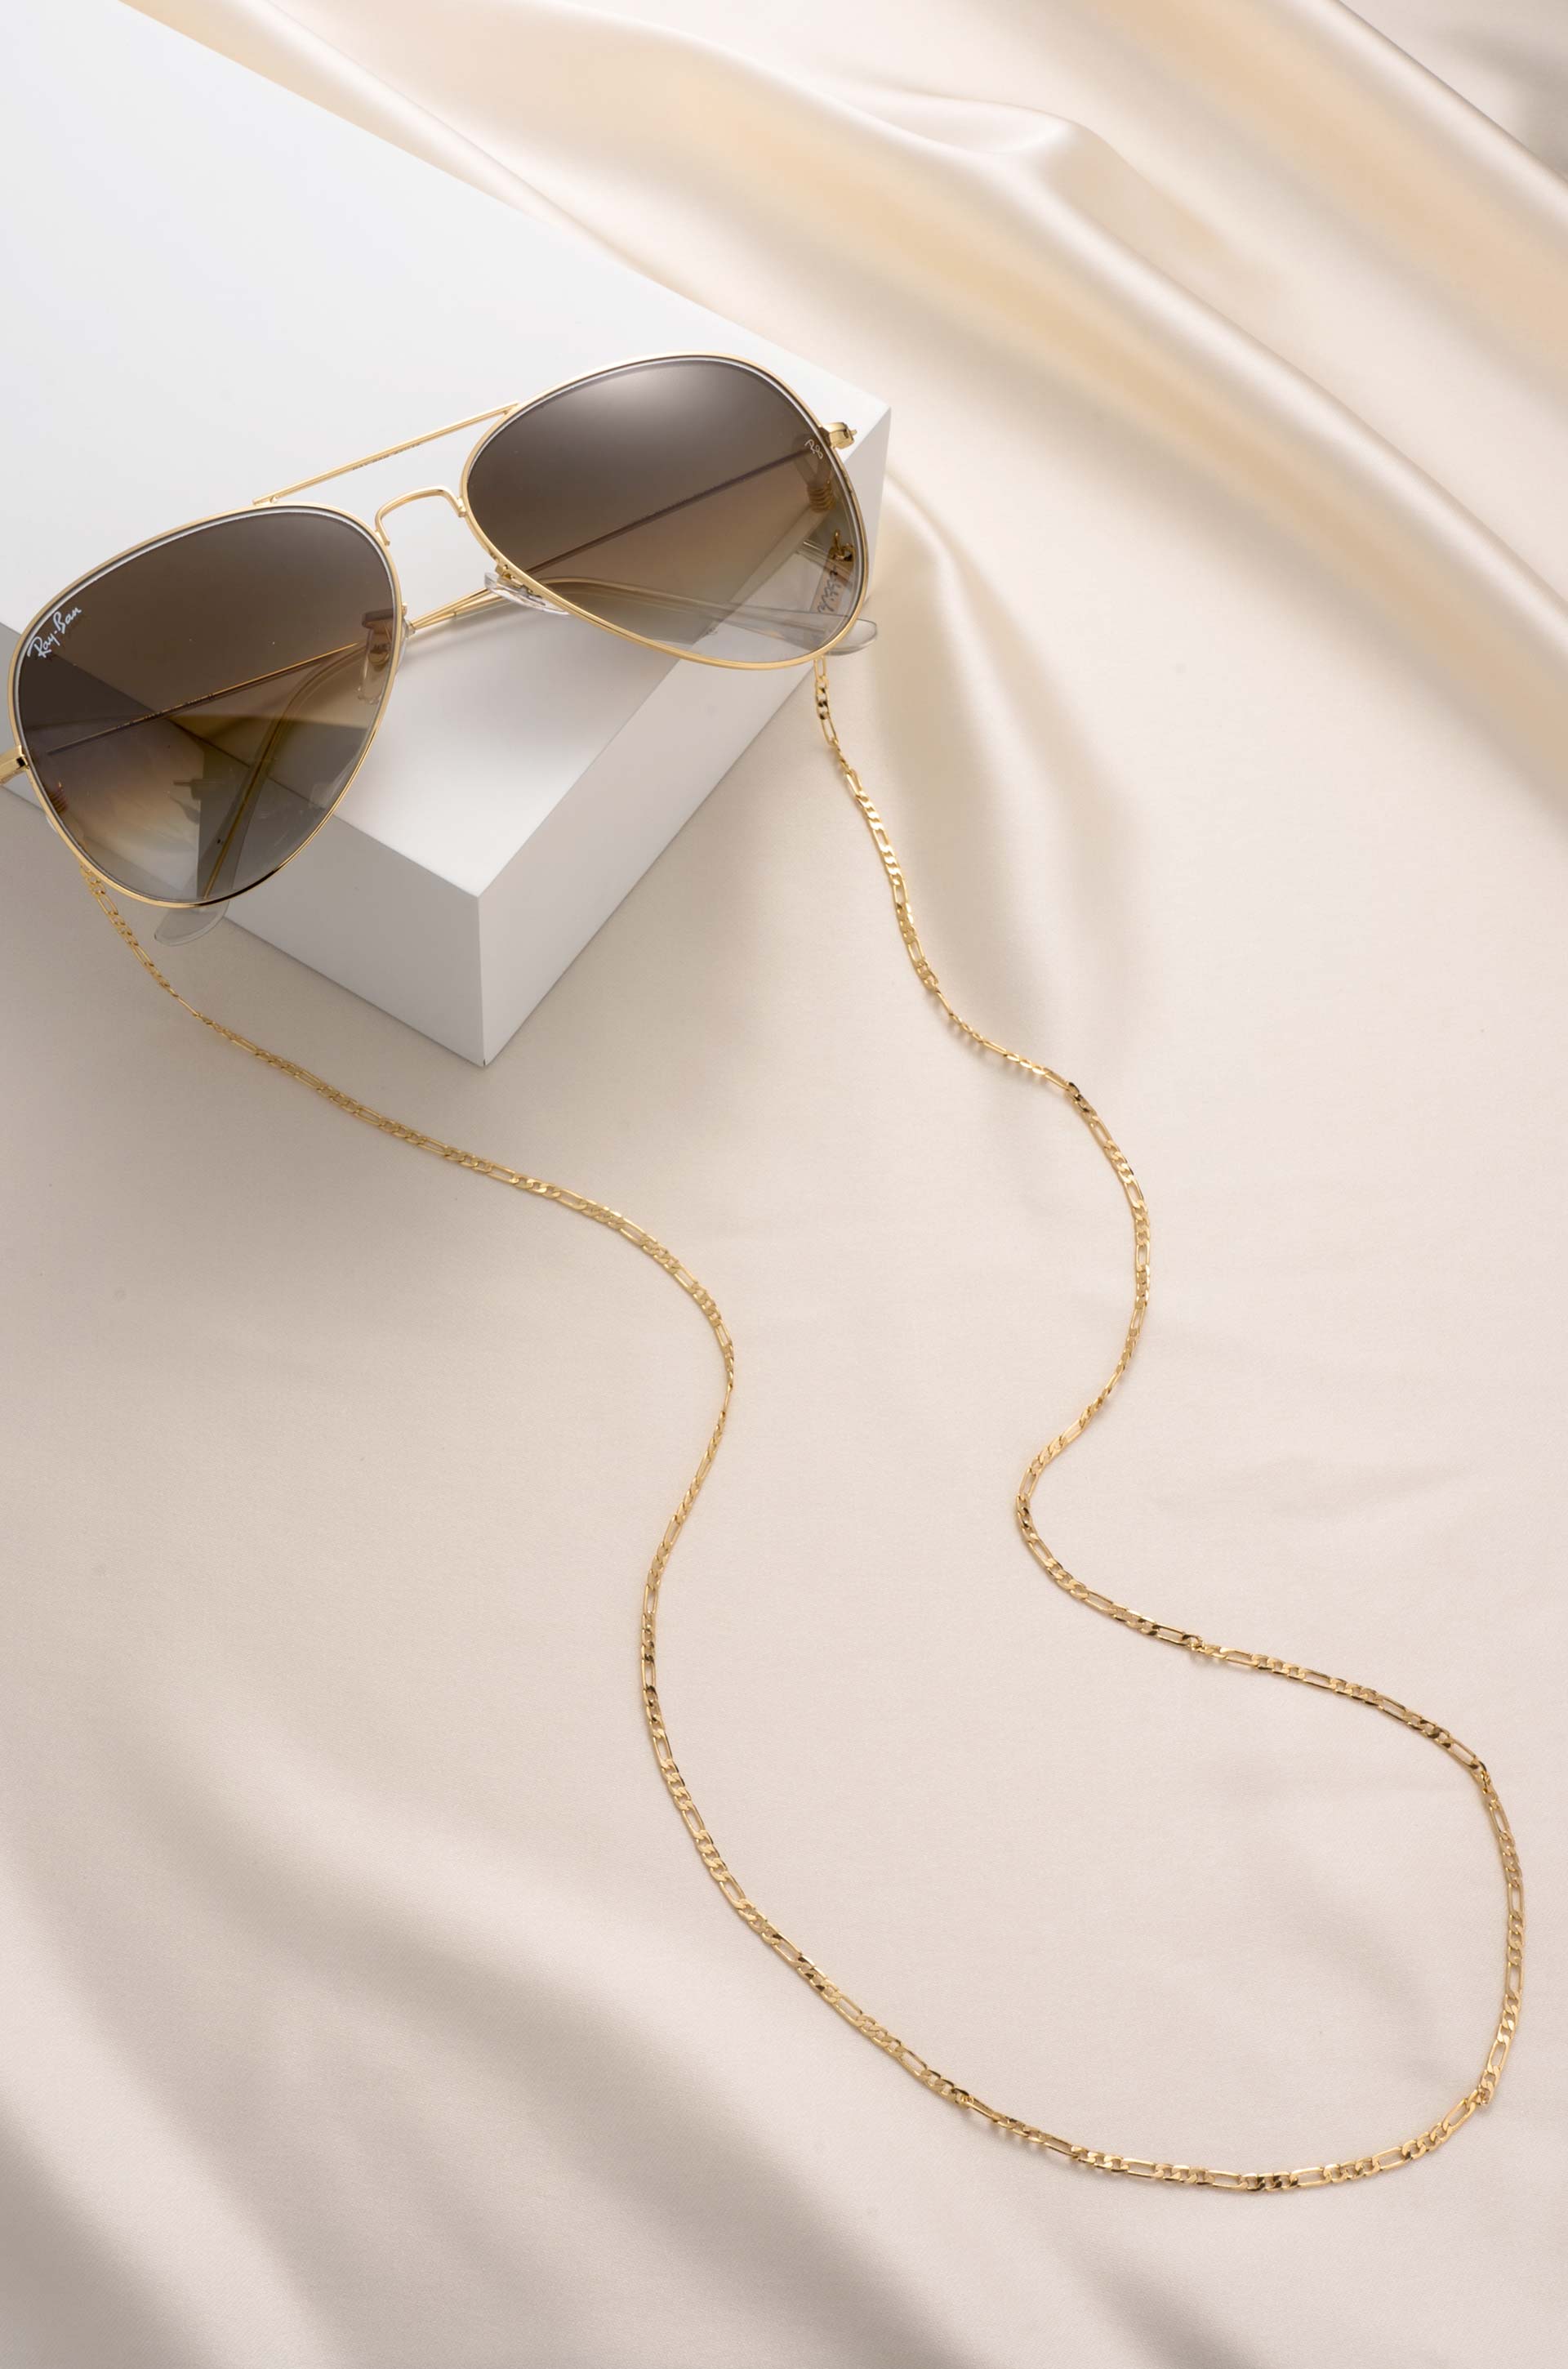 Everyday Glasses Chain in gold on slate